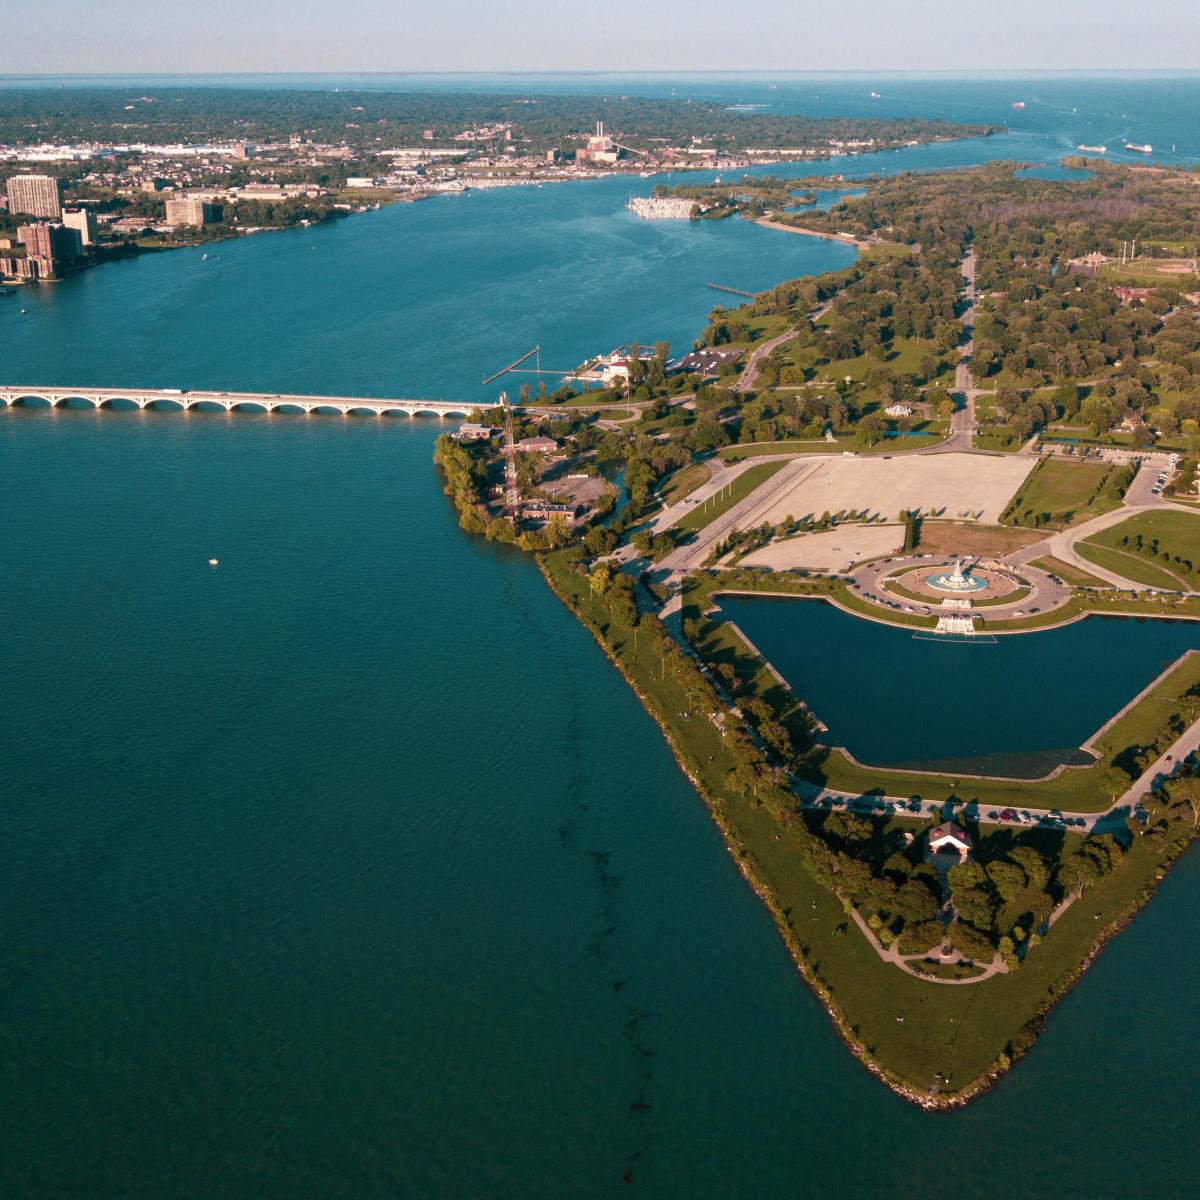 Map: Visioning a Better Future for Detroit's Belle Isle